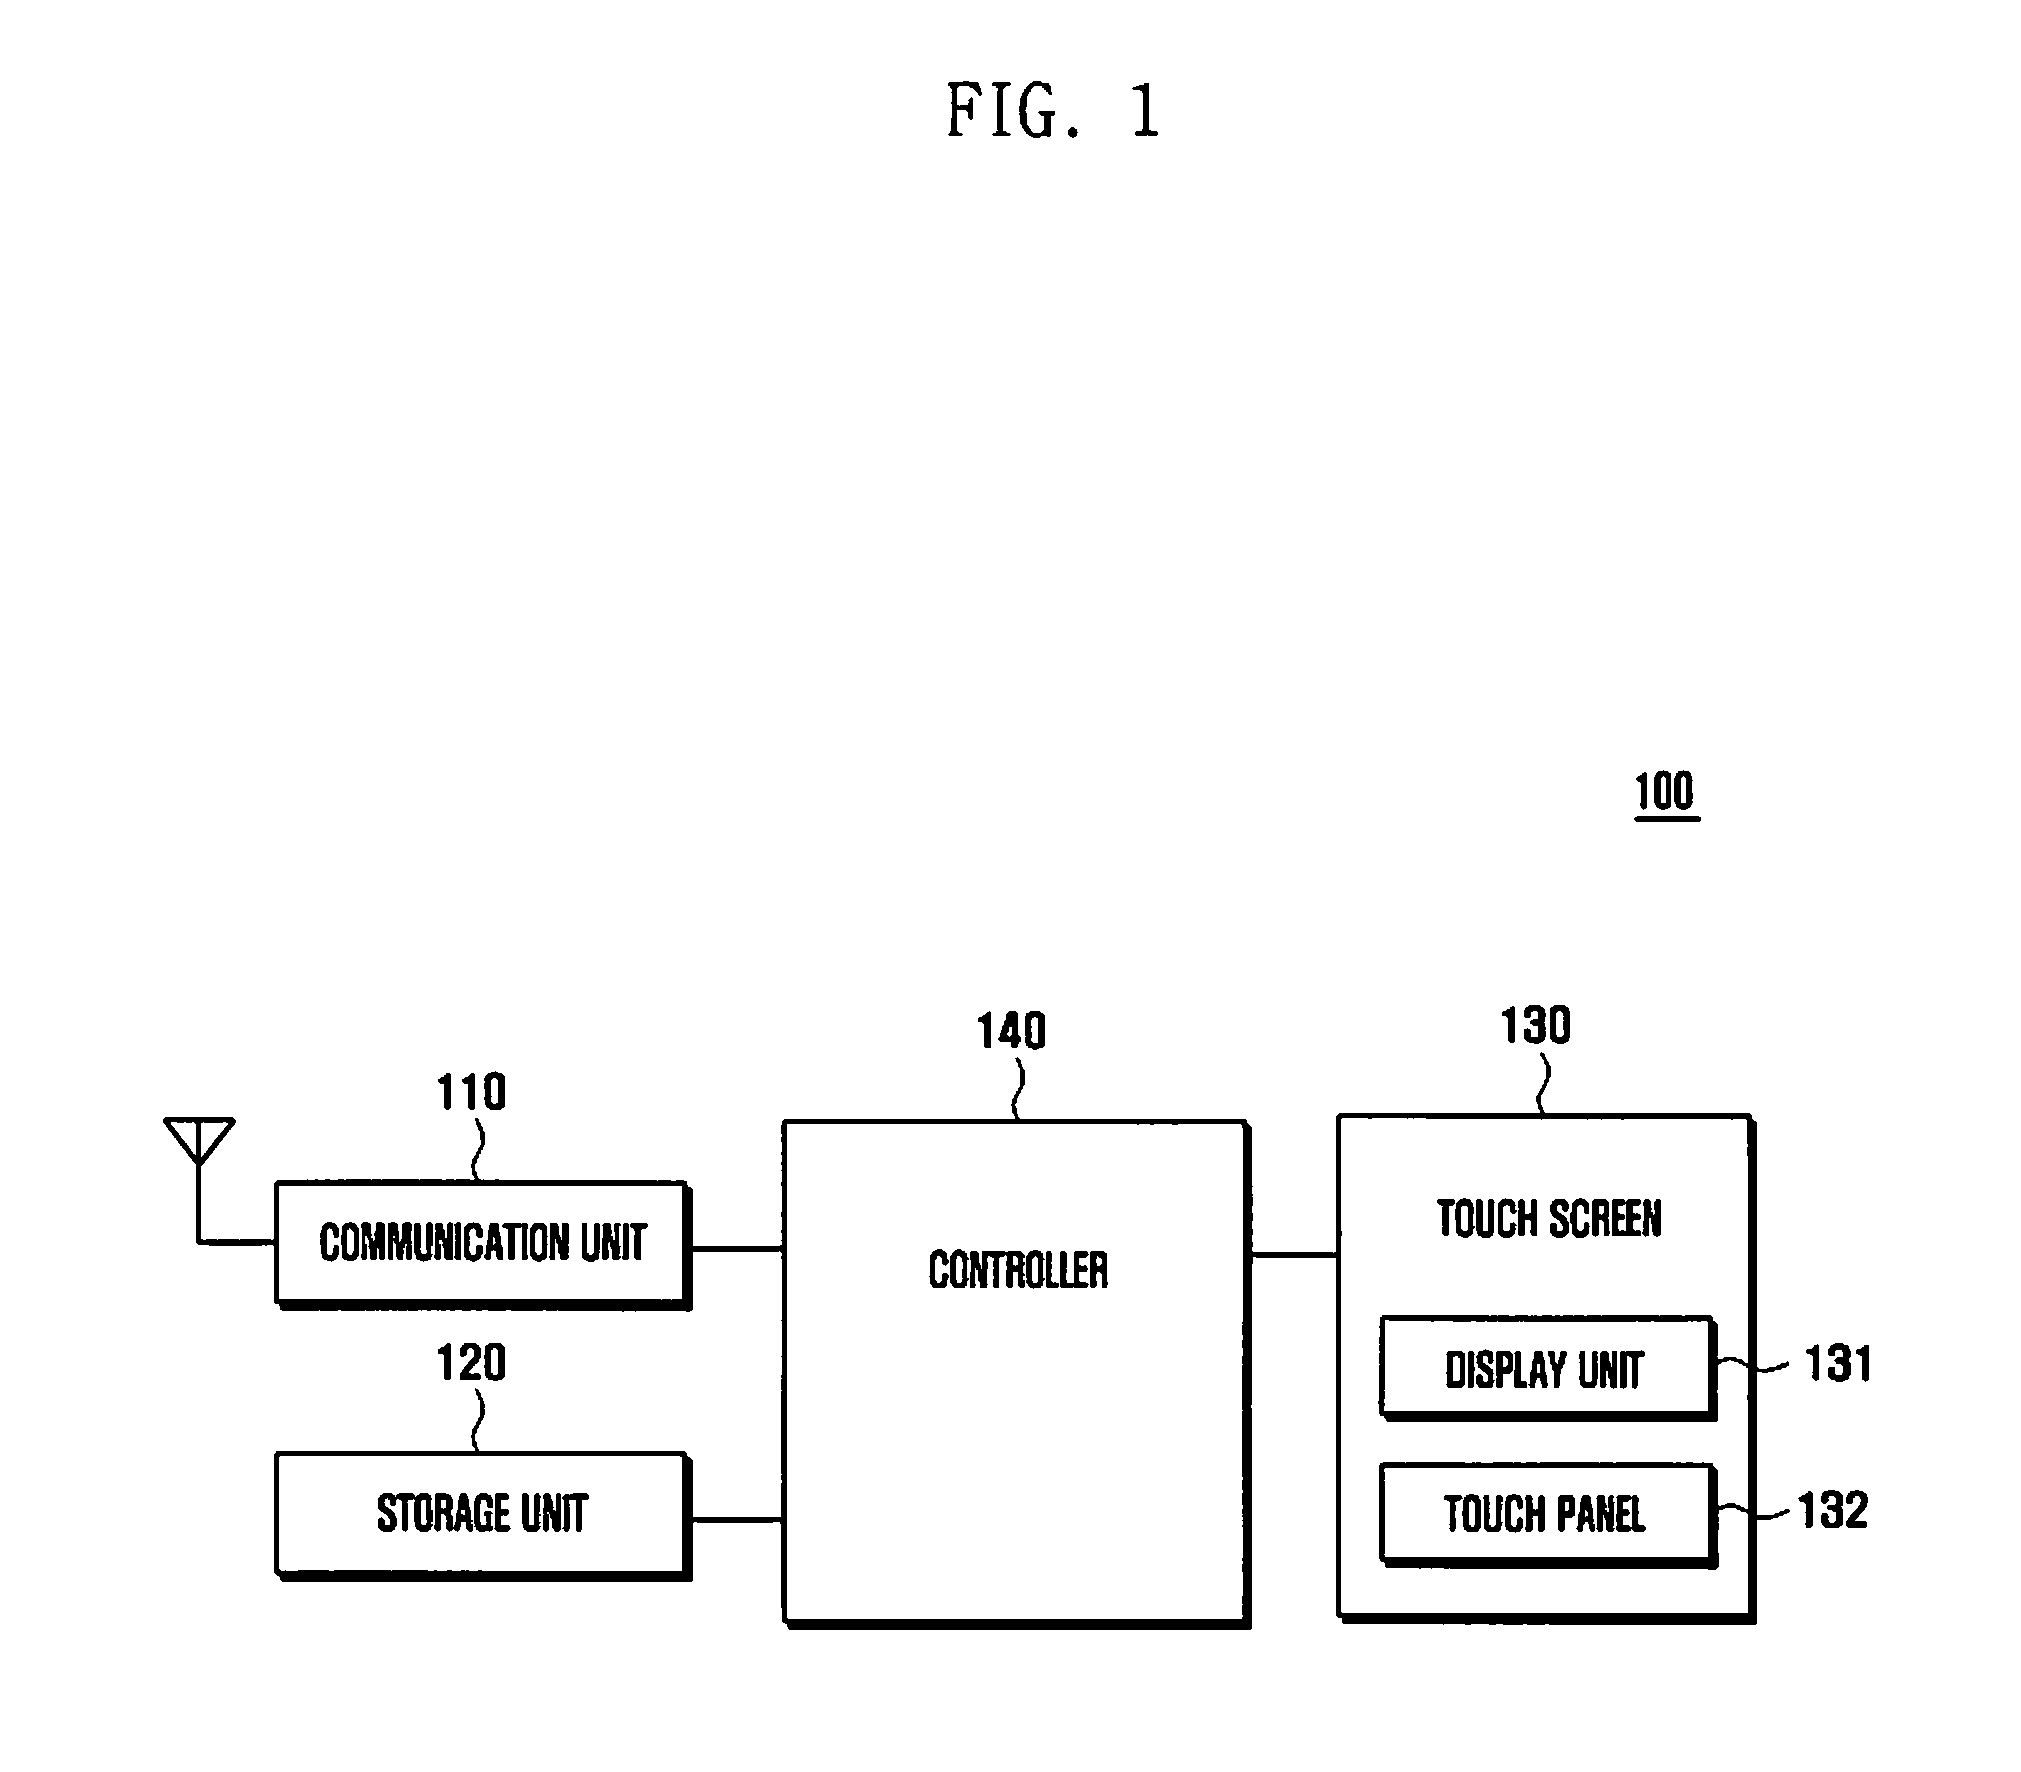 Method and apparatus for sharing contents of electronic device